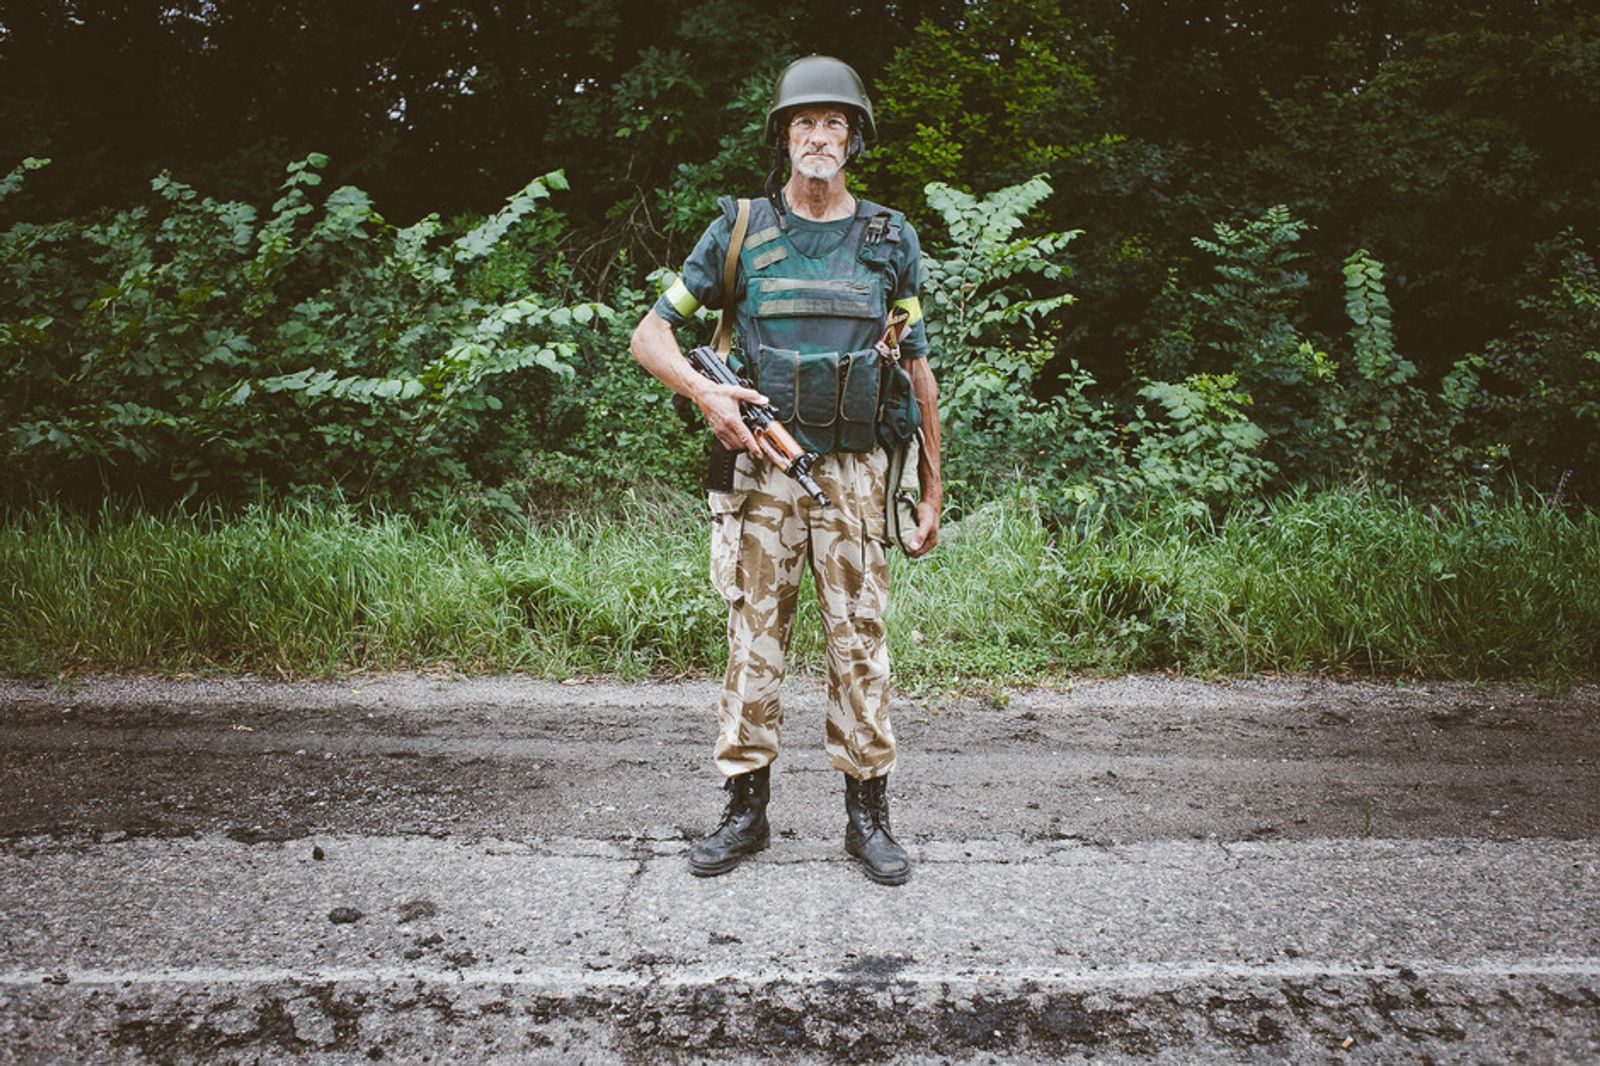 © Alexander Vasukovich - Image from the War among sunflowers. Volunteers of Donbass photography project